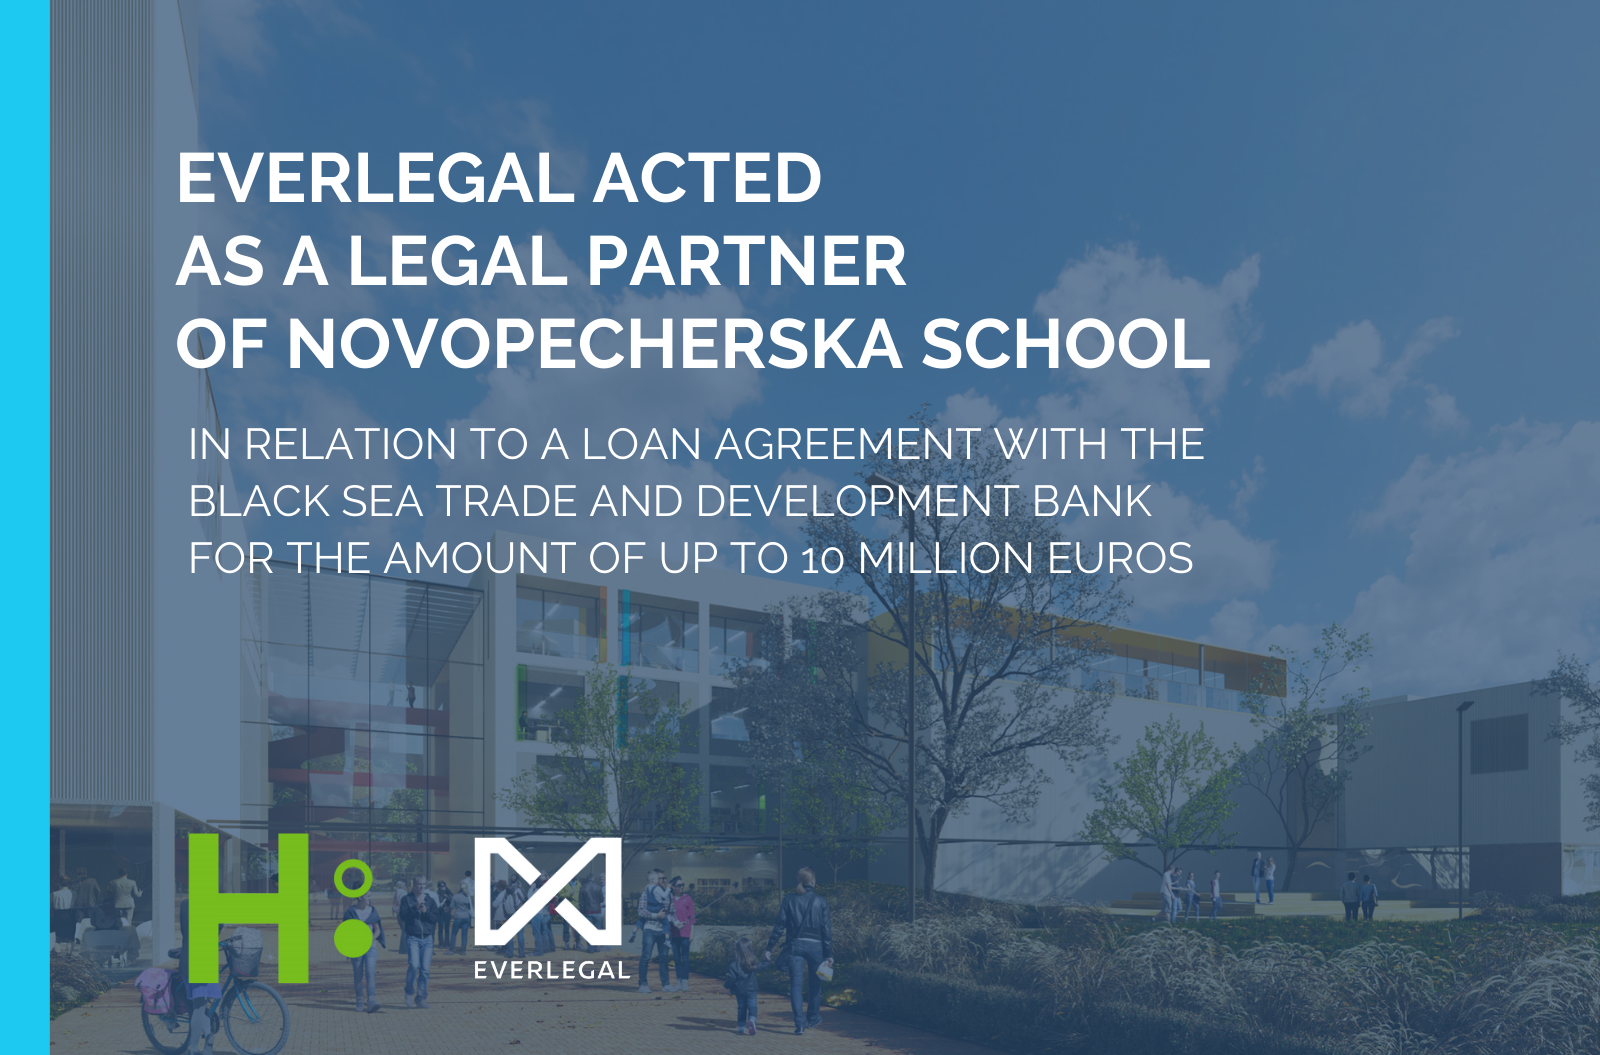 EVERLEGAL acted as a legal partner of Novopecherska School in relation to a loan agreement with the BSTDB for the amount of up to 10 million euros 